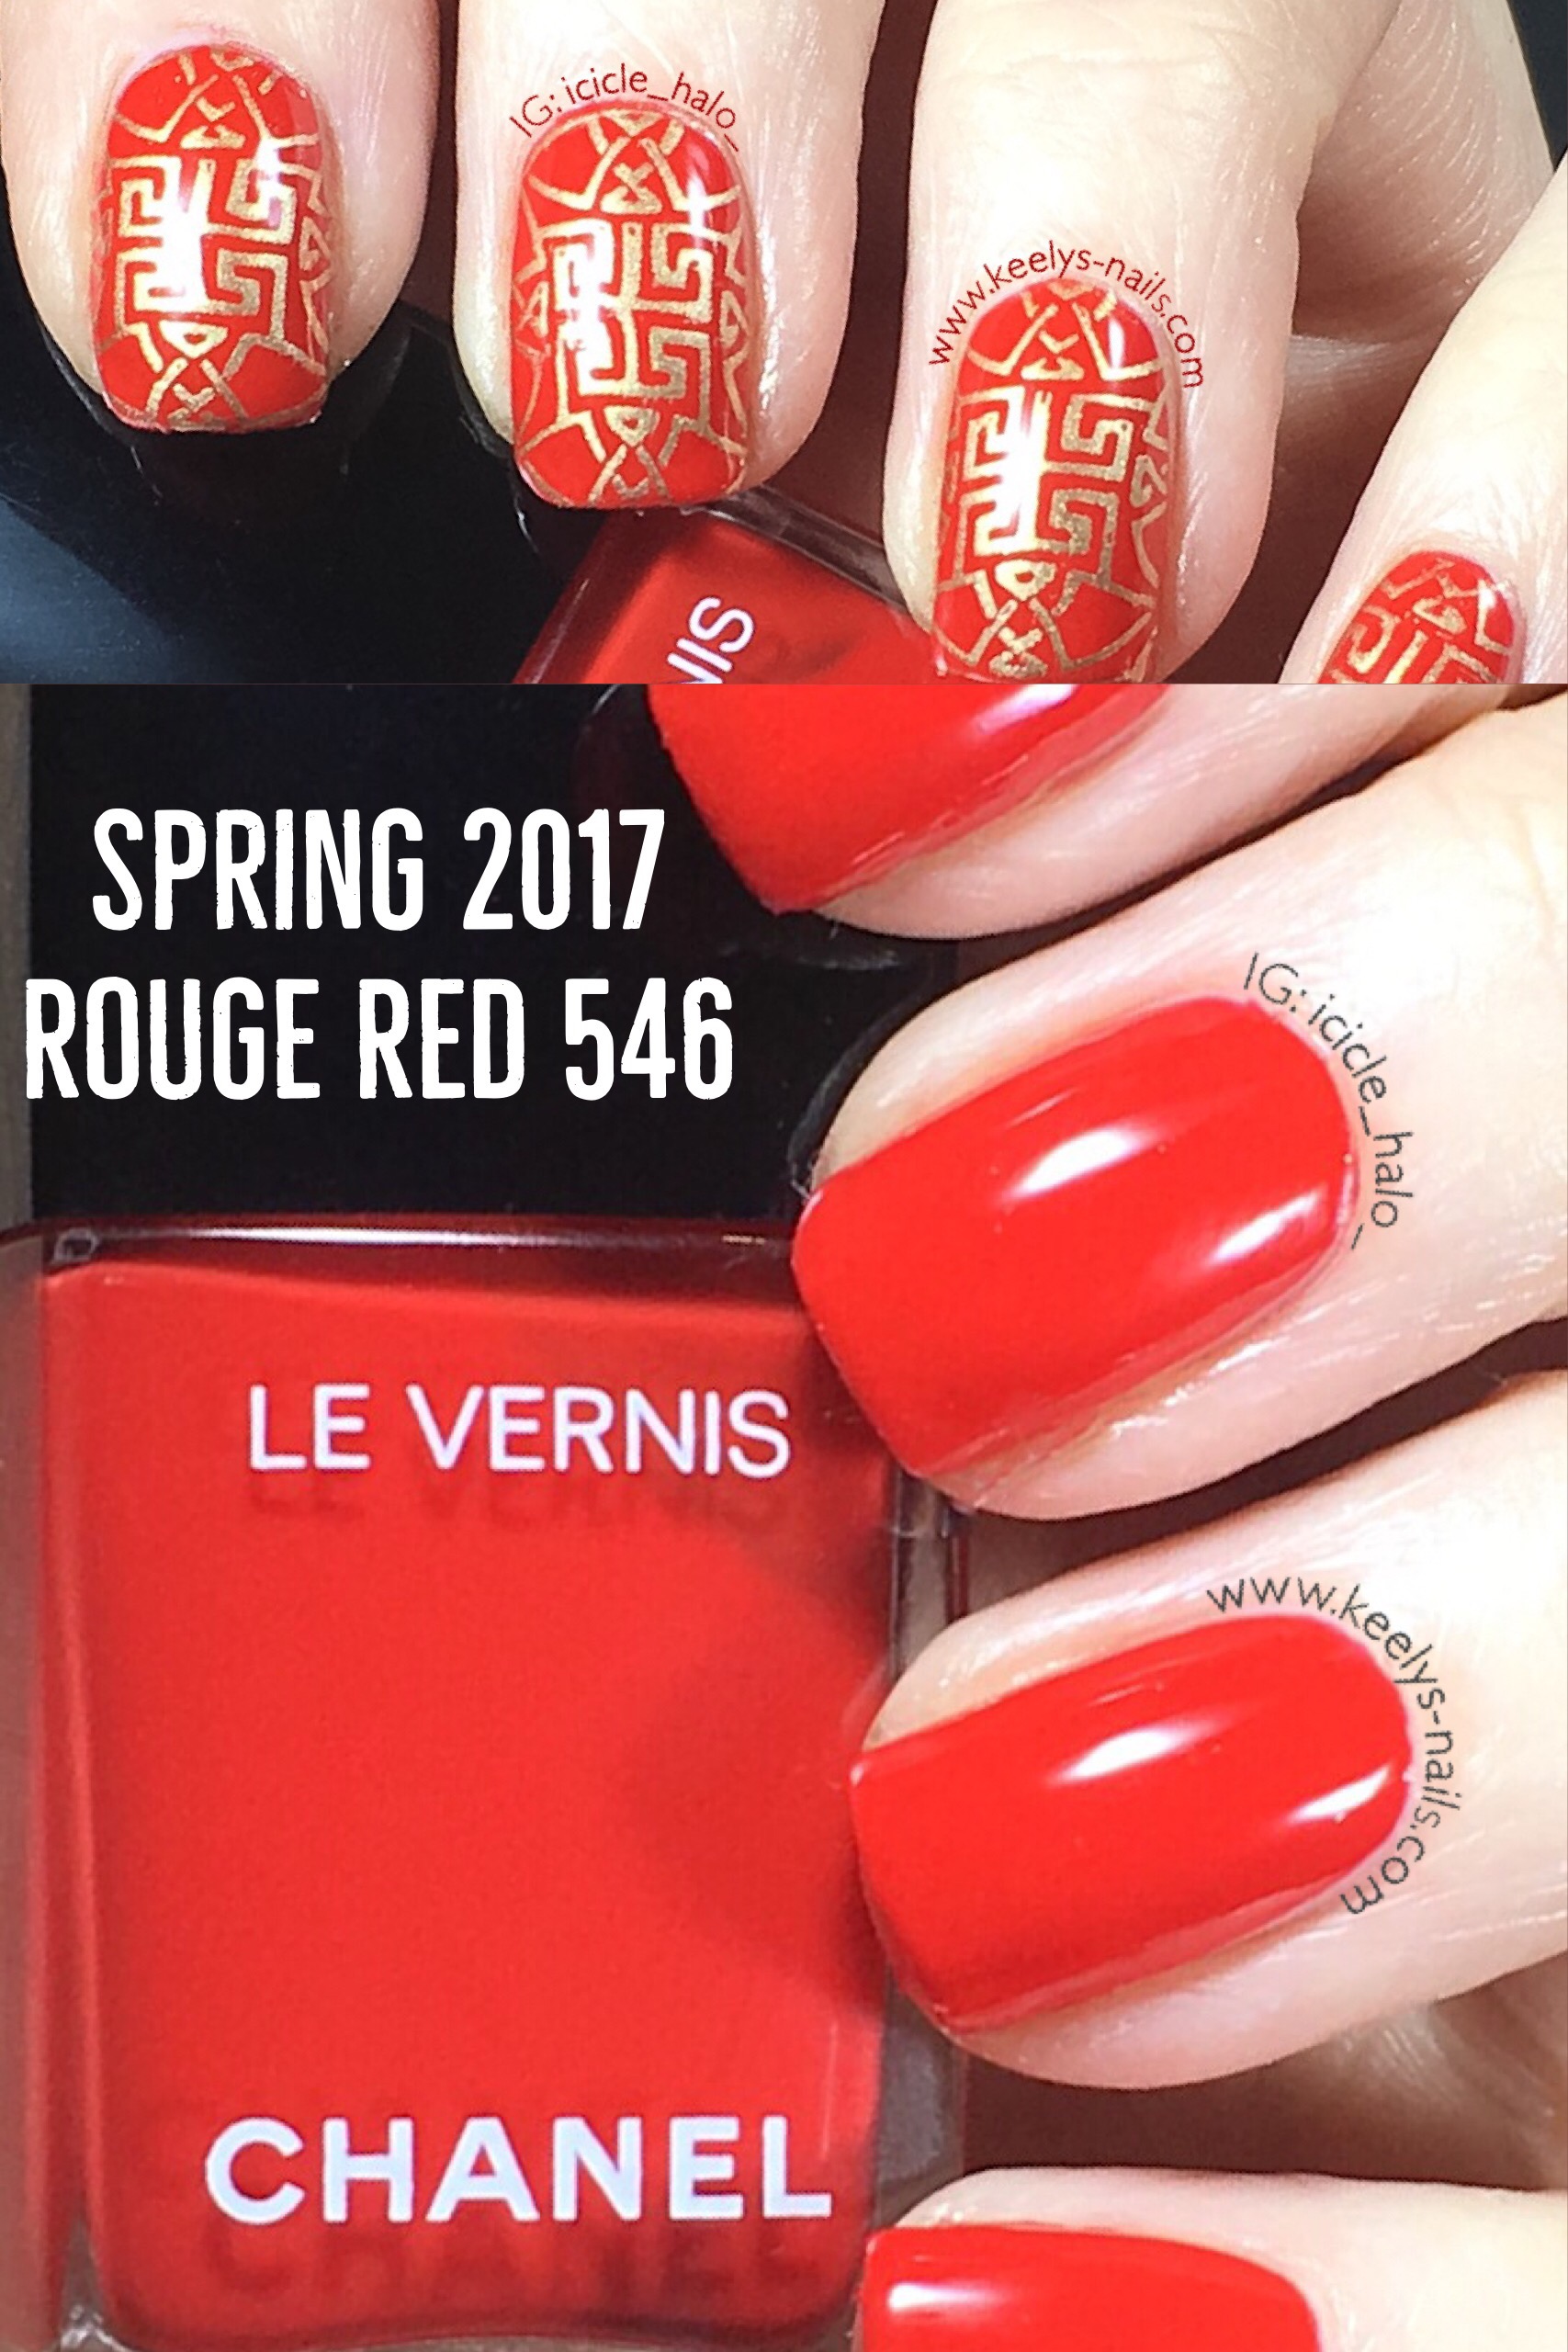 Swatch: Chanel Rouge Red 546 Spring 2017 - Keely's Nails